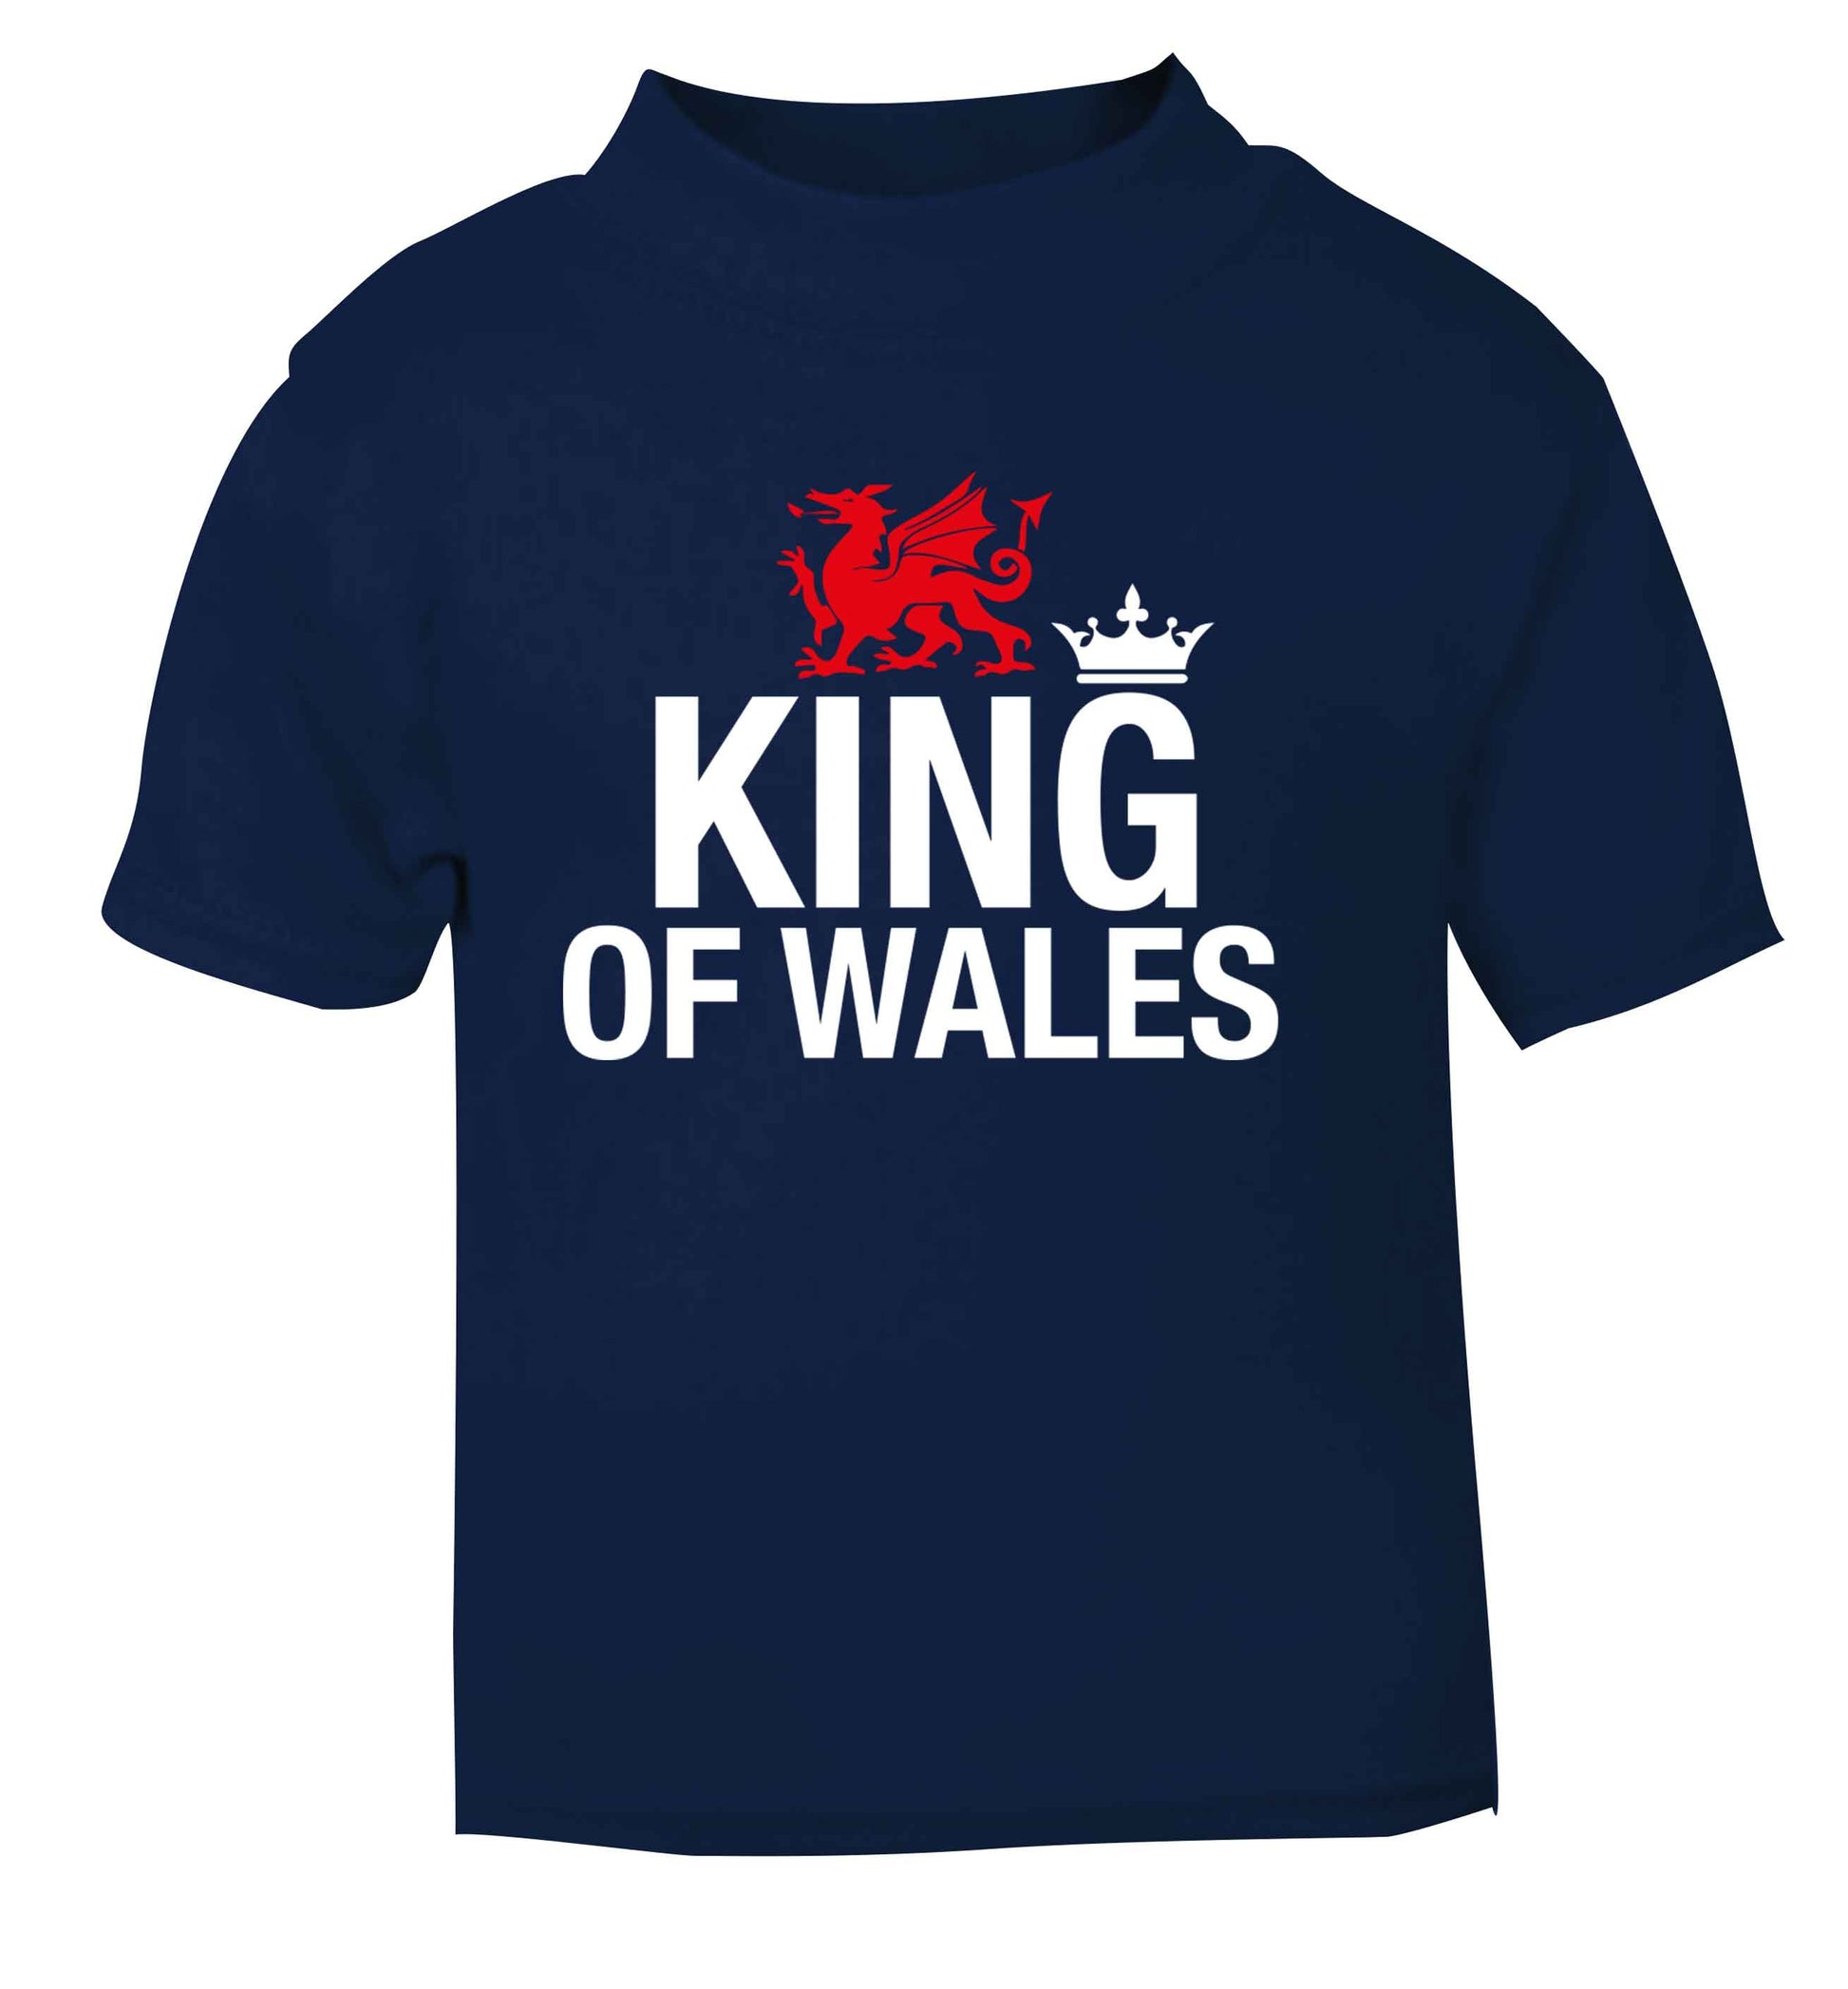 King of Wales navy Baby Toddler Tshirt 2 Years